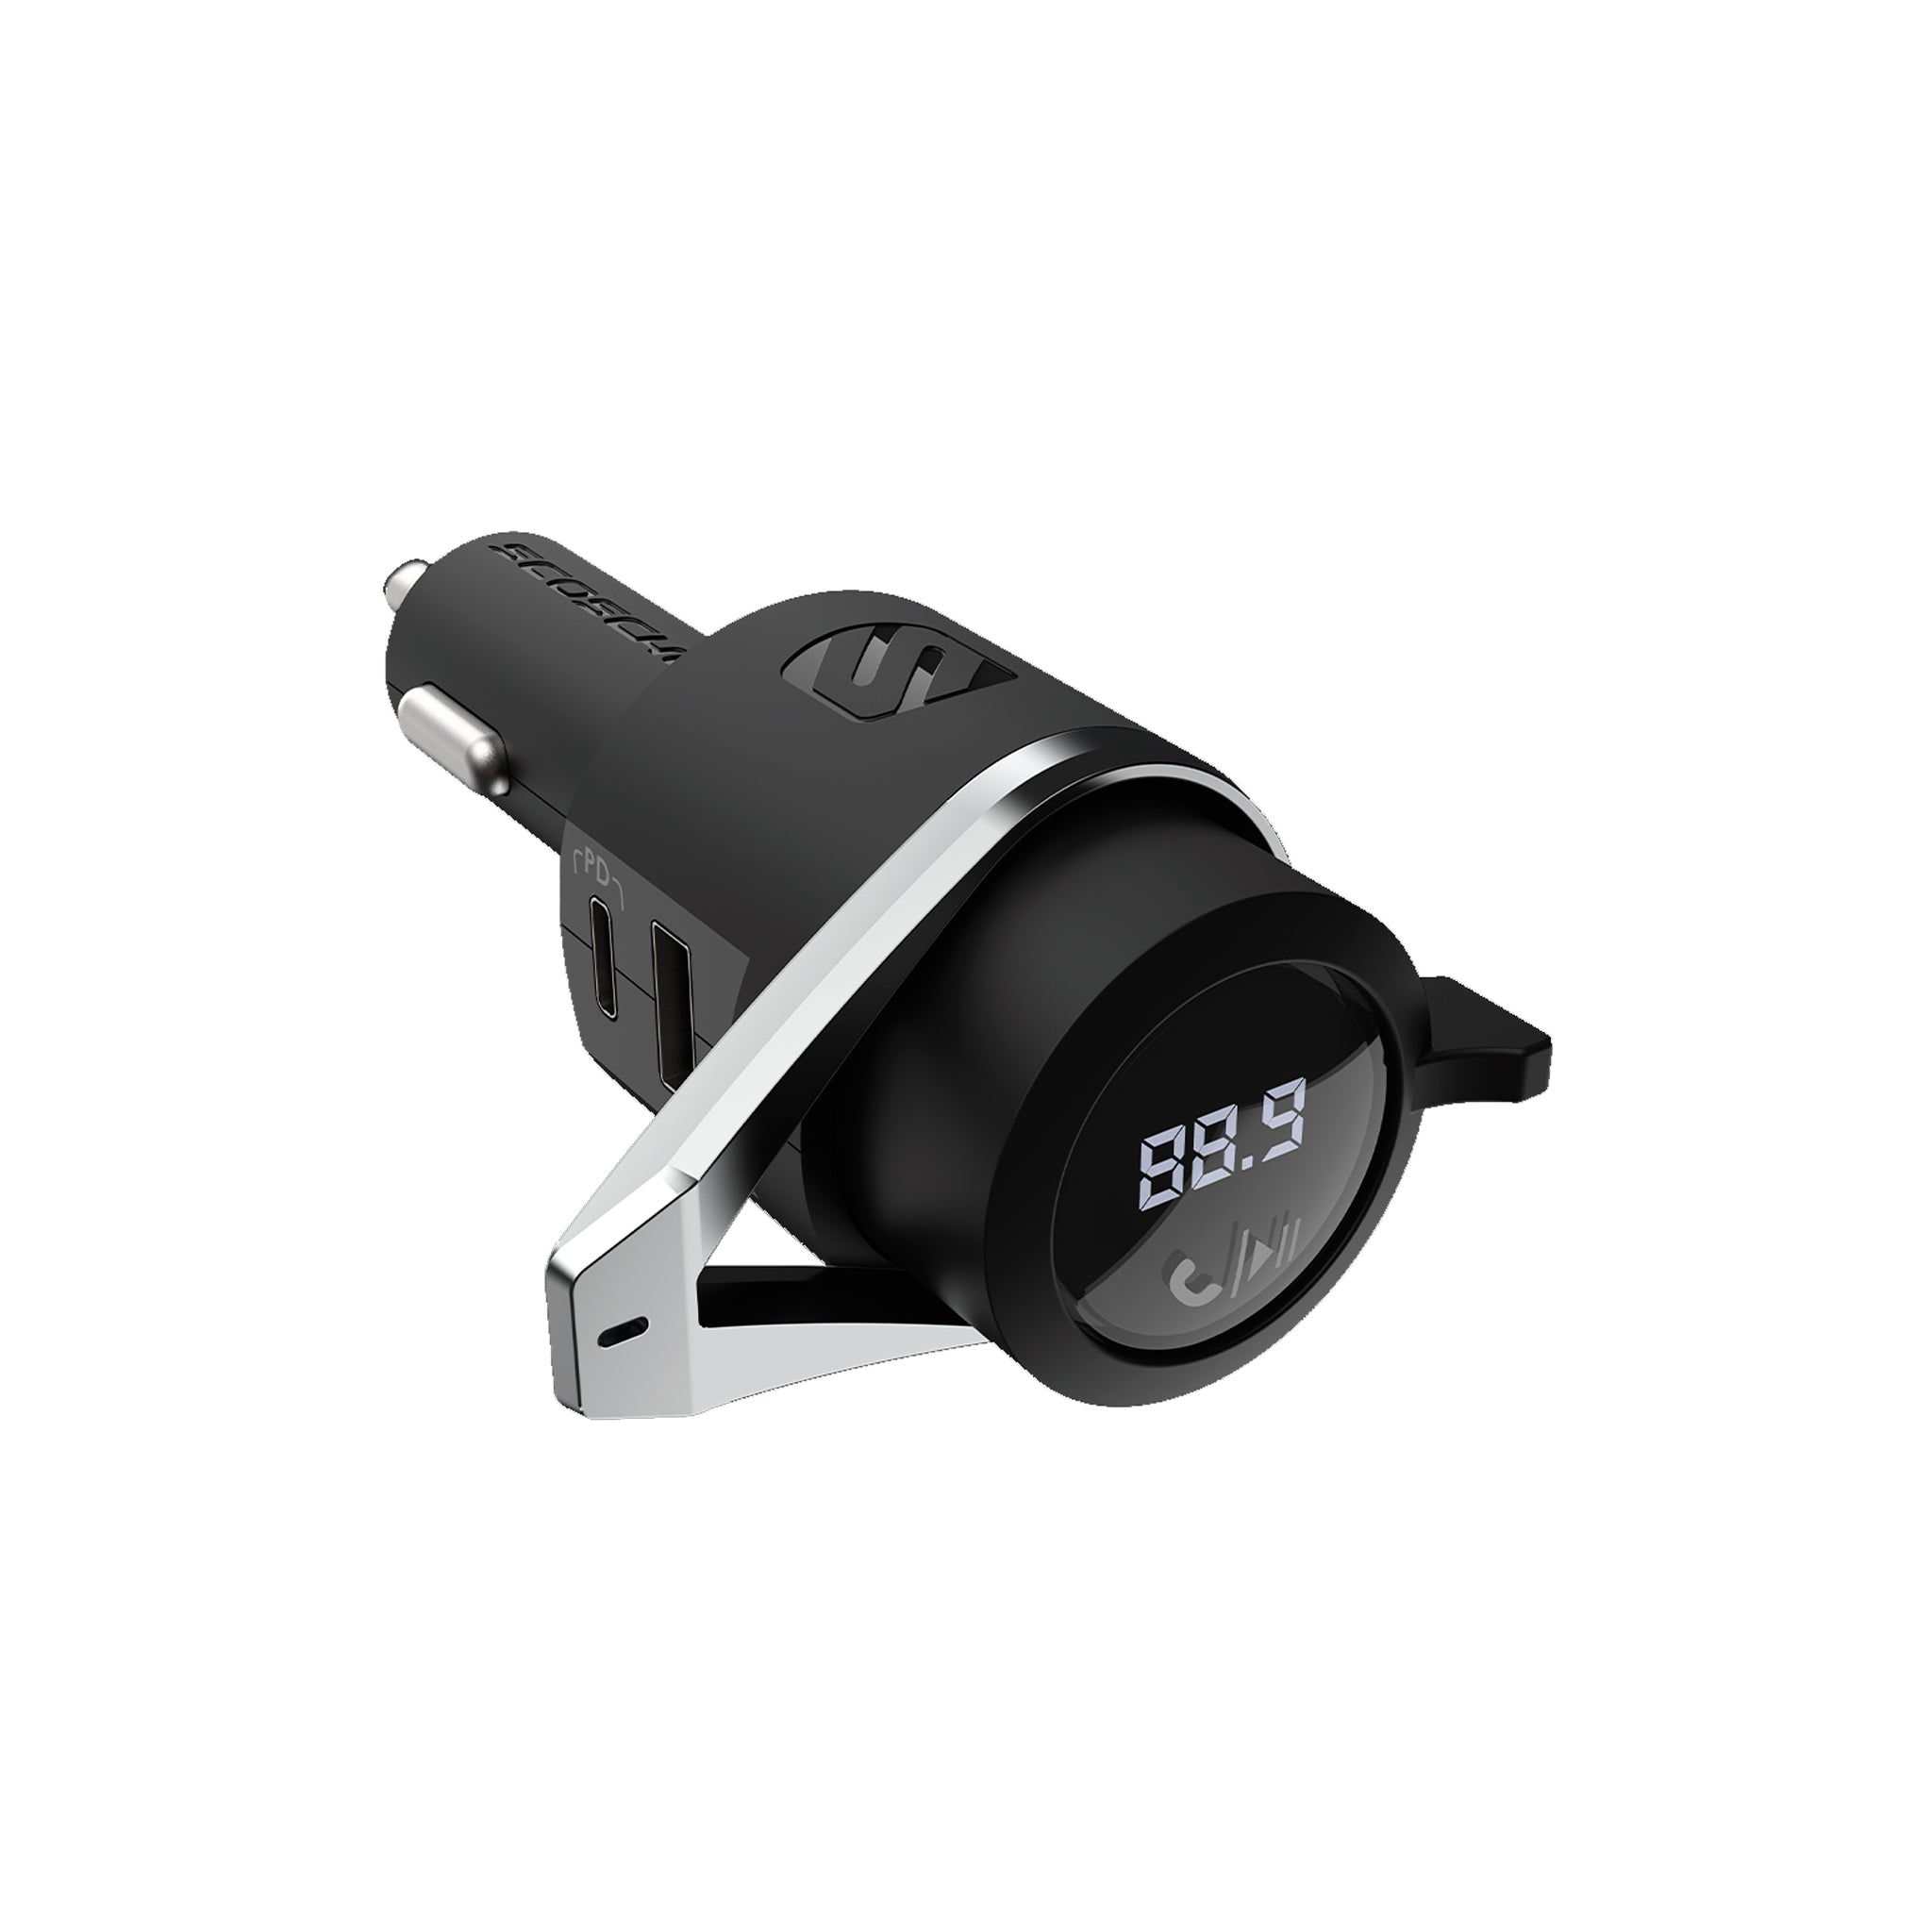 Scosche - Btfreq Pro Bluetooth Fm Transmitter With Power Delivery Charging - Silver